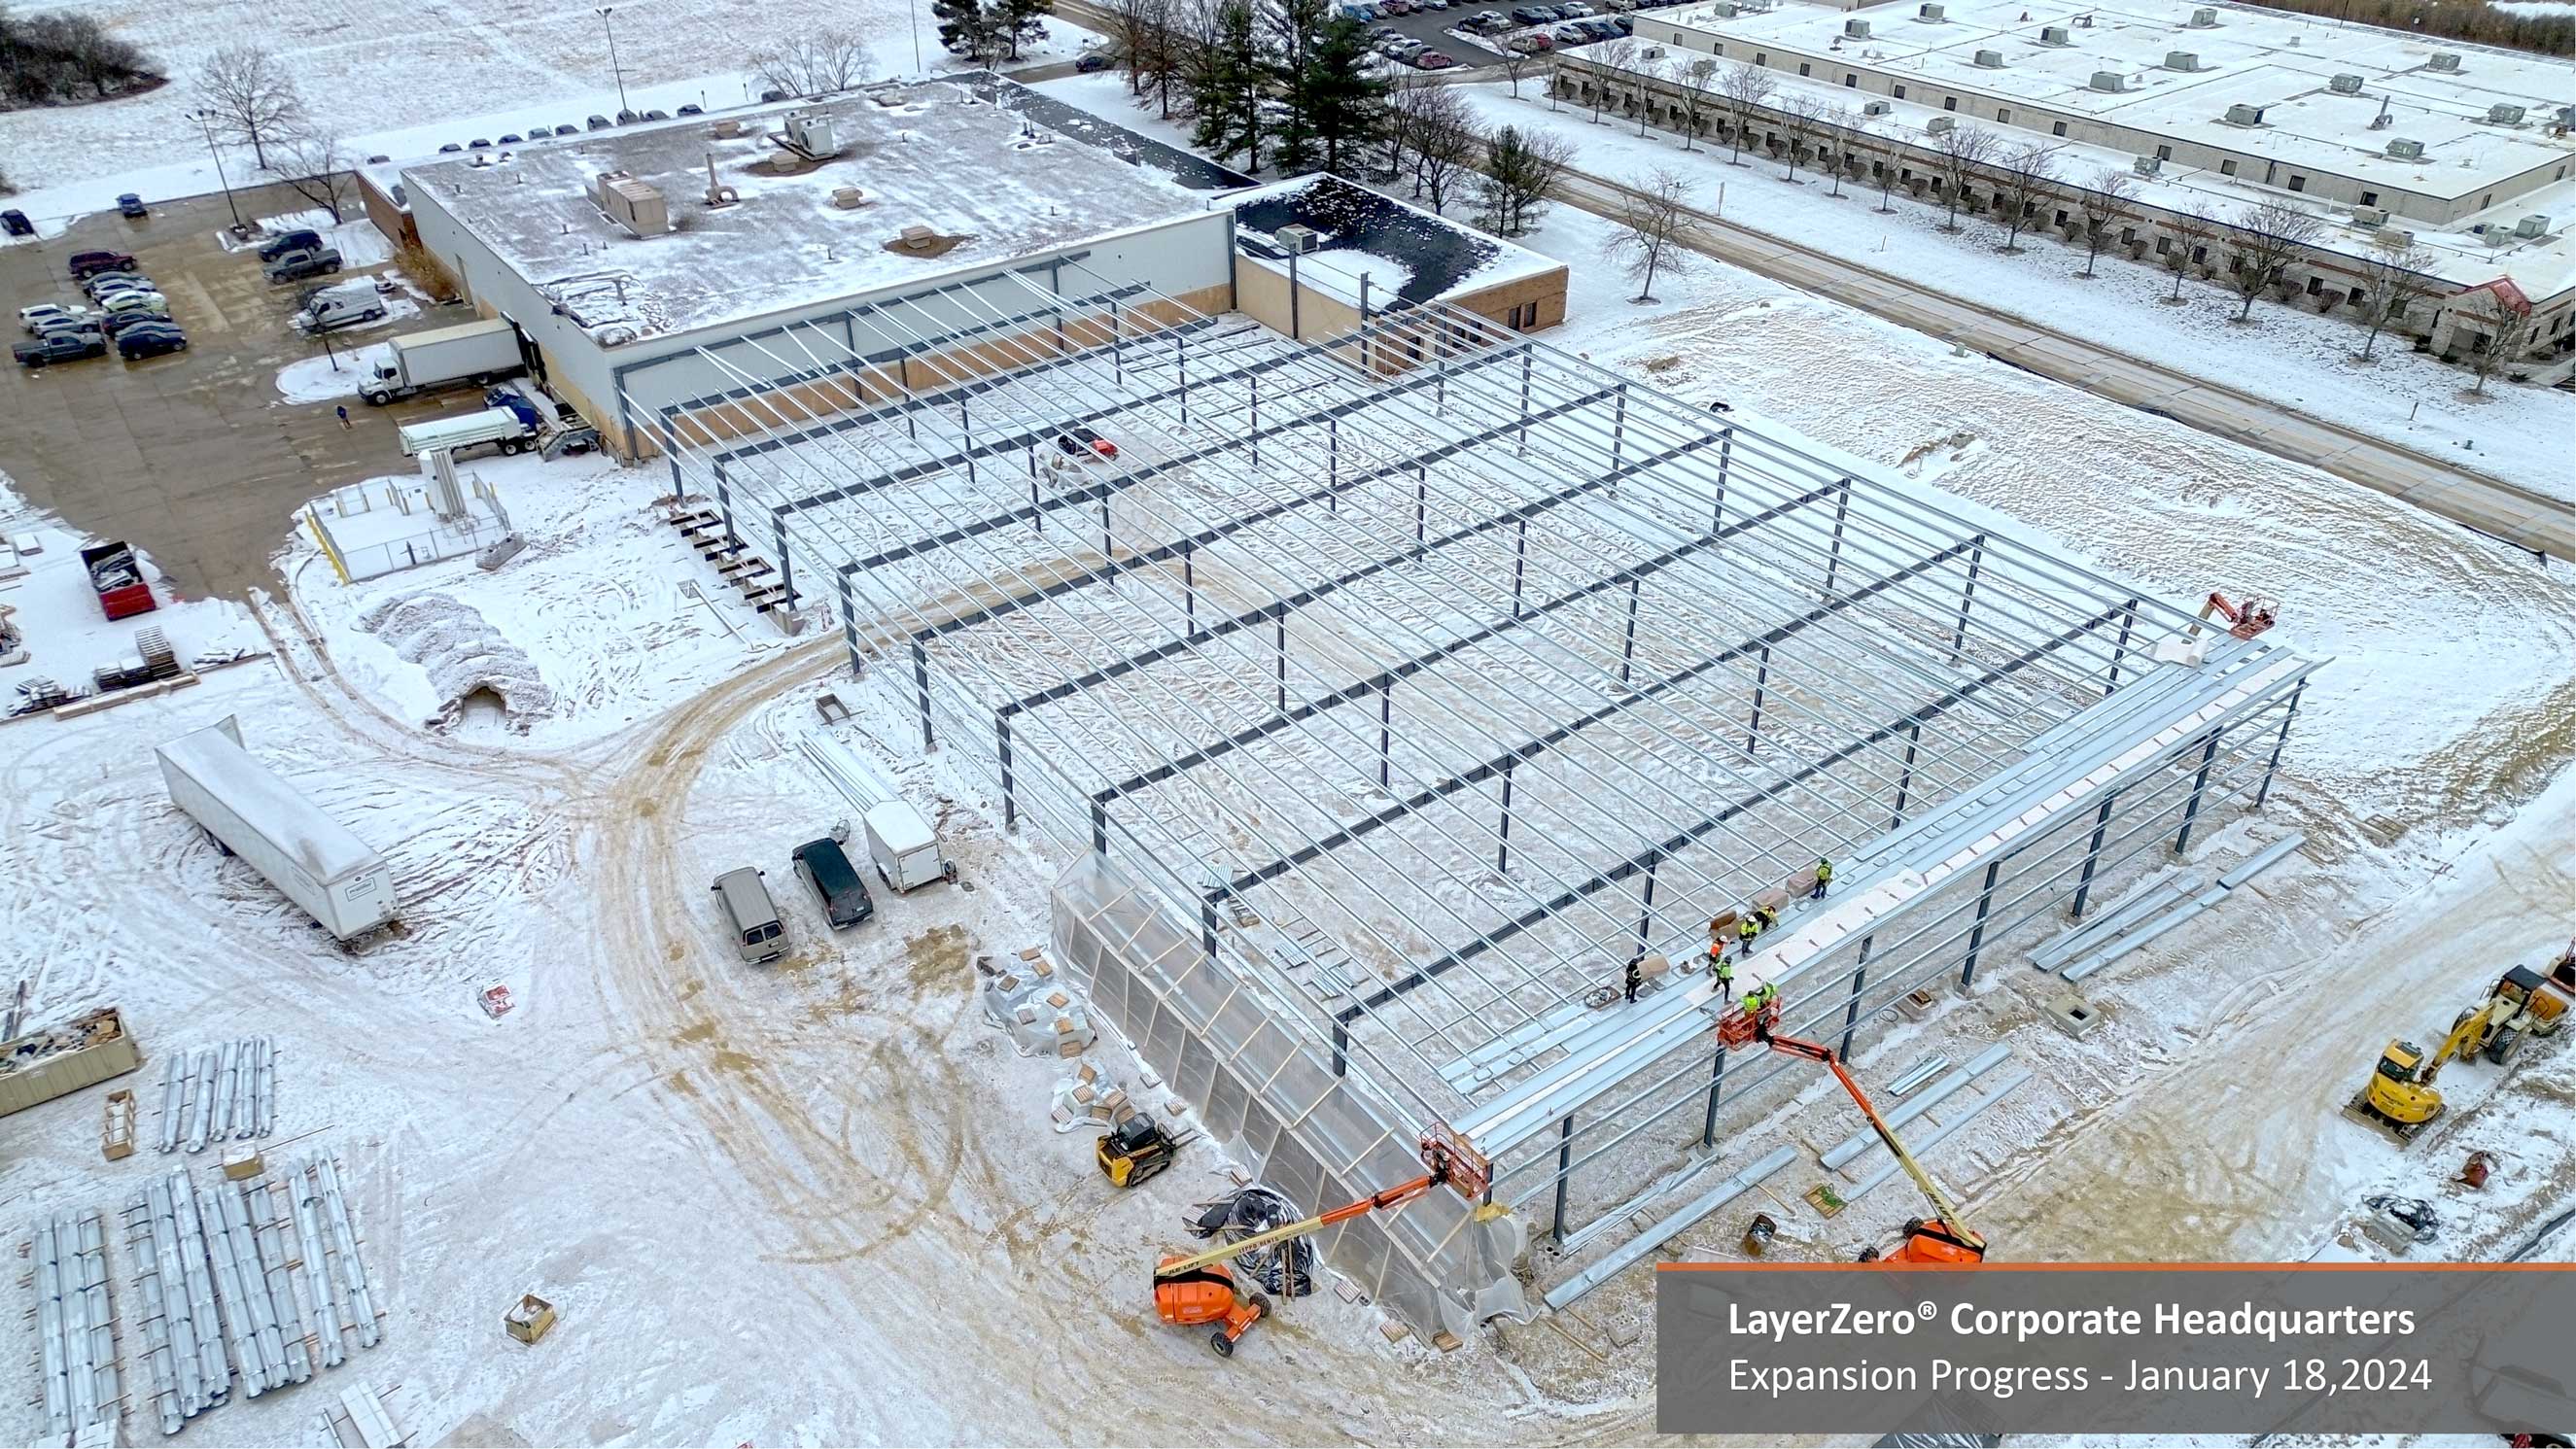 The roof Is Being installed at LayerZero